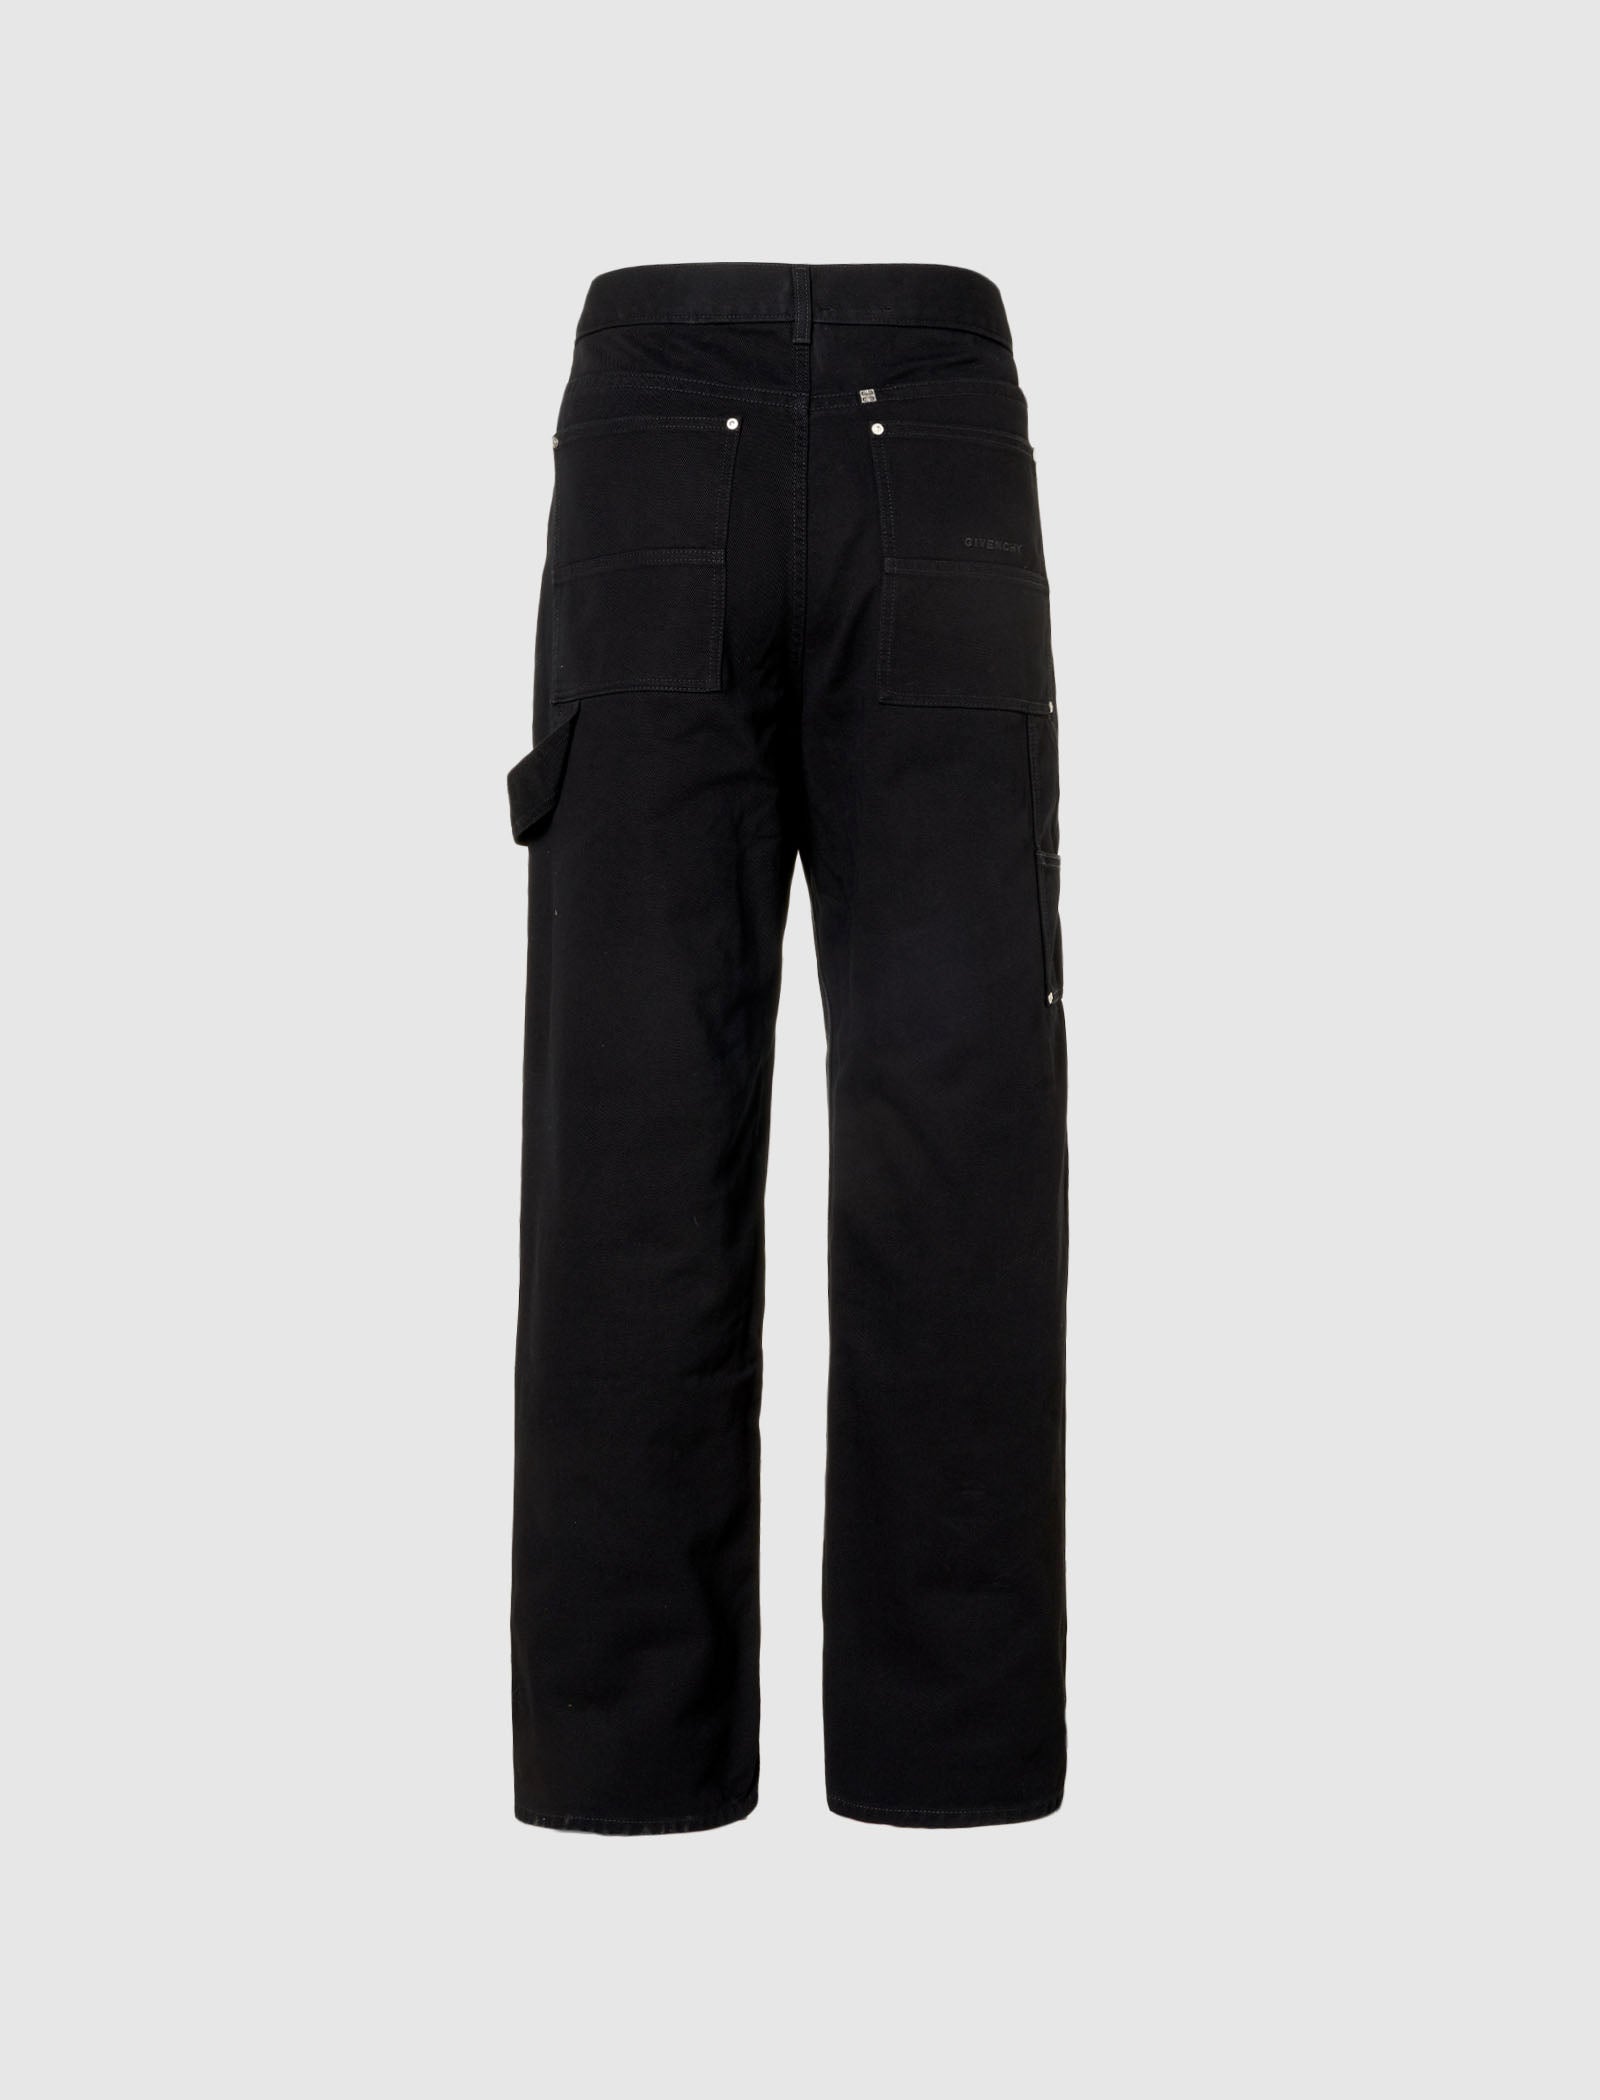 GIVENCHY STUDDED CARPENTER PANTS – A Ma Maniere